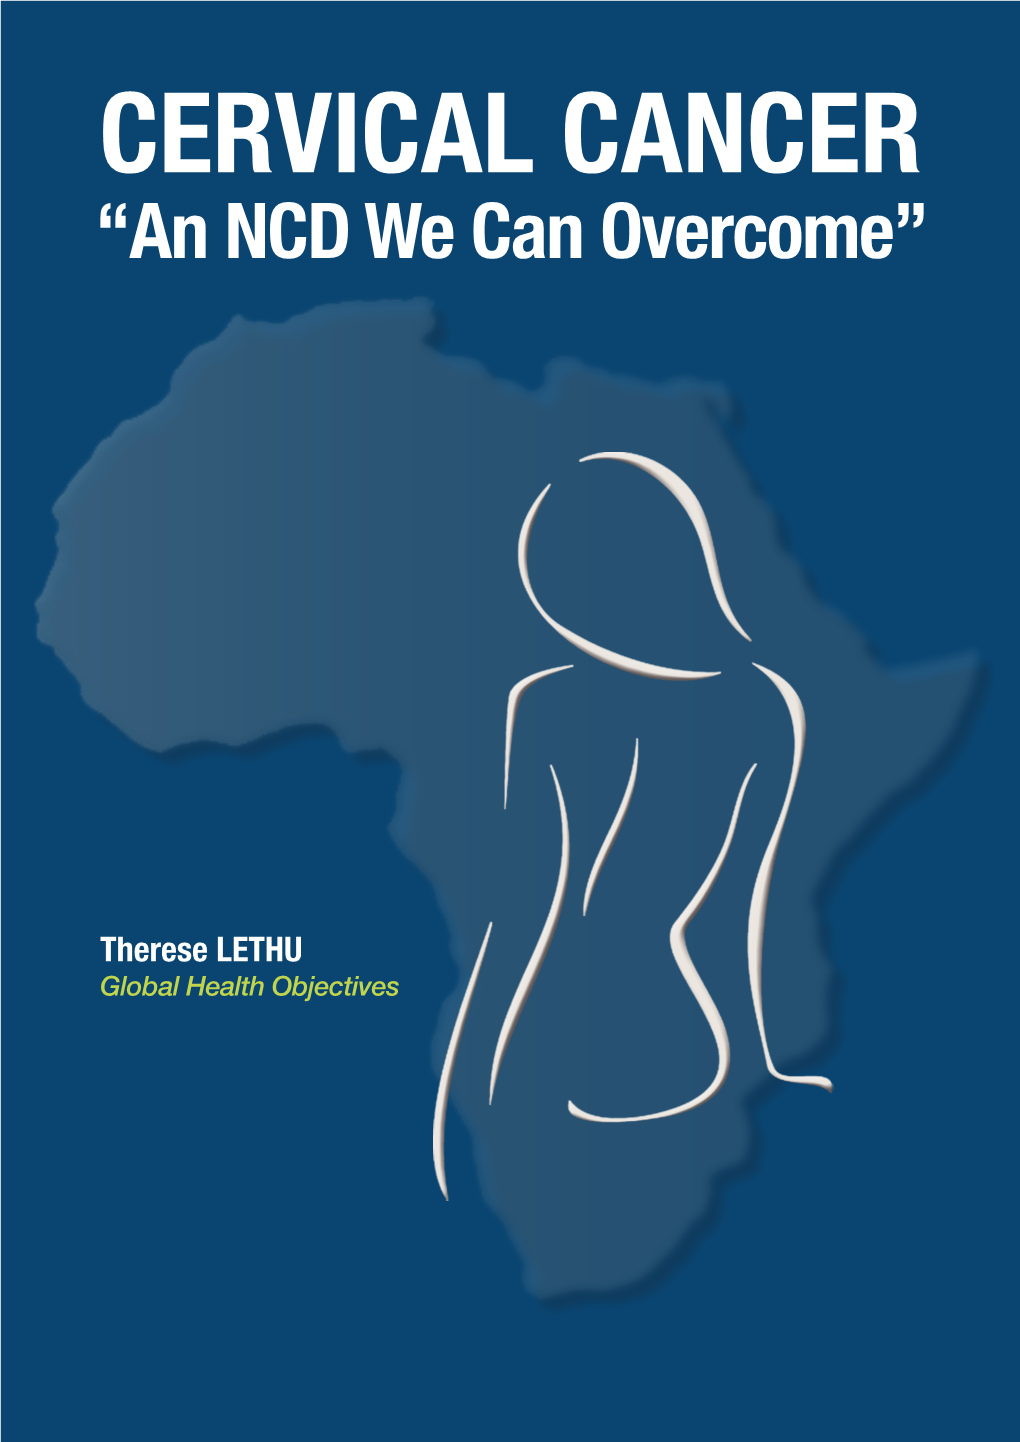 CERVICAL CANCER “An NCD We Can Overcome”